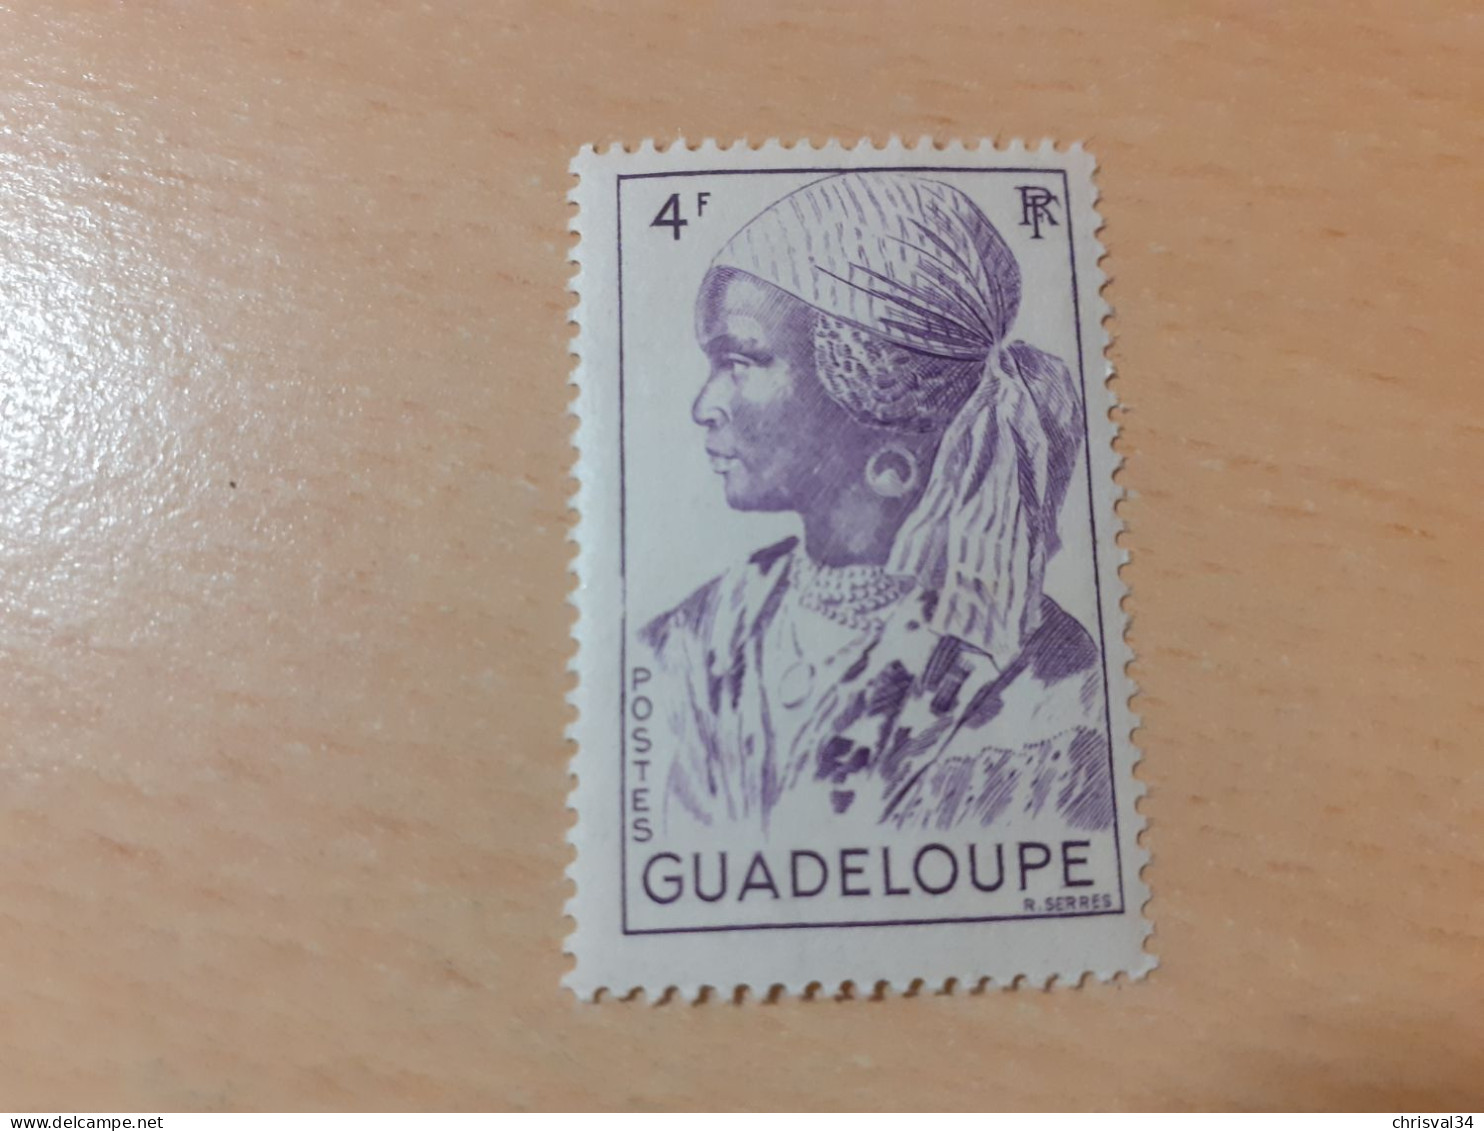 TIMBRE   GUADELOUPE       N  206    COTE  1,25   EUROS  NEUF  TRACE  CHARNIERE - Ongebruikt